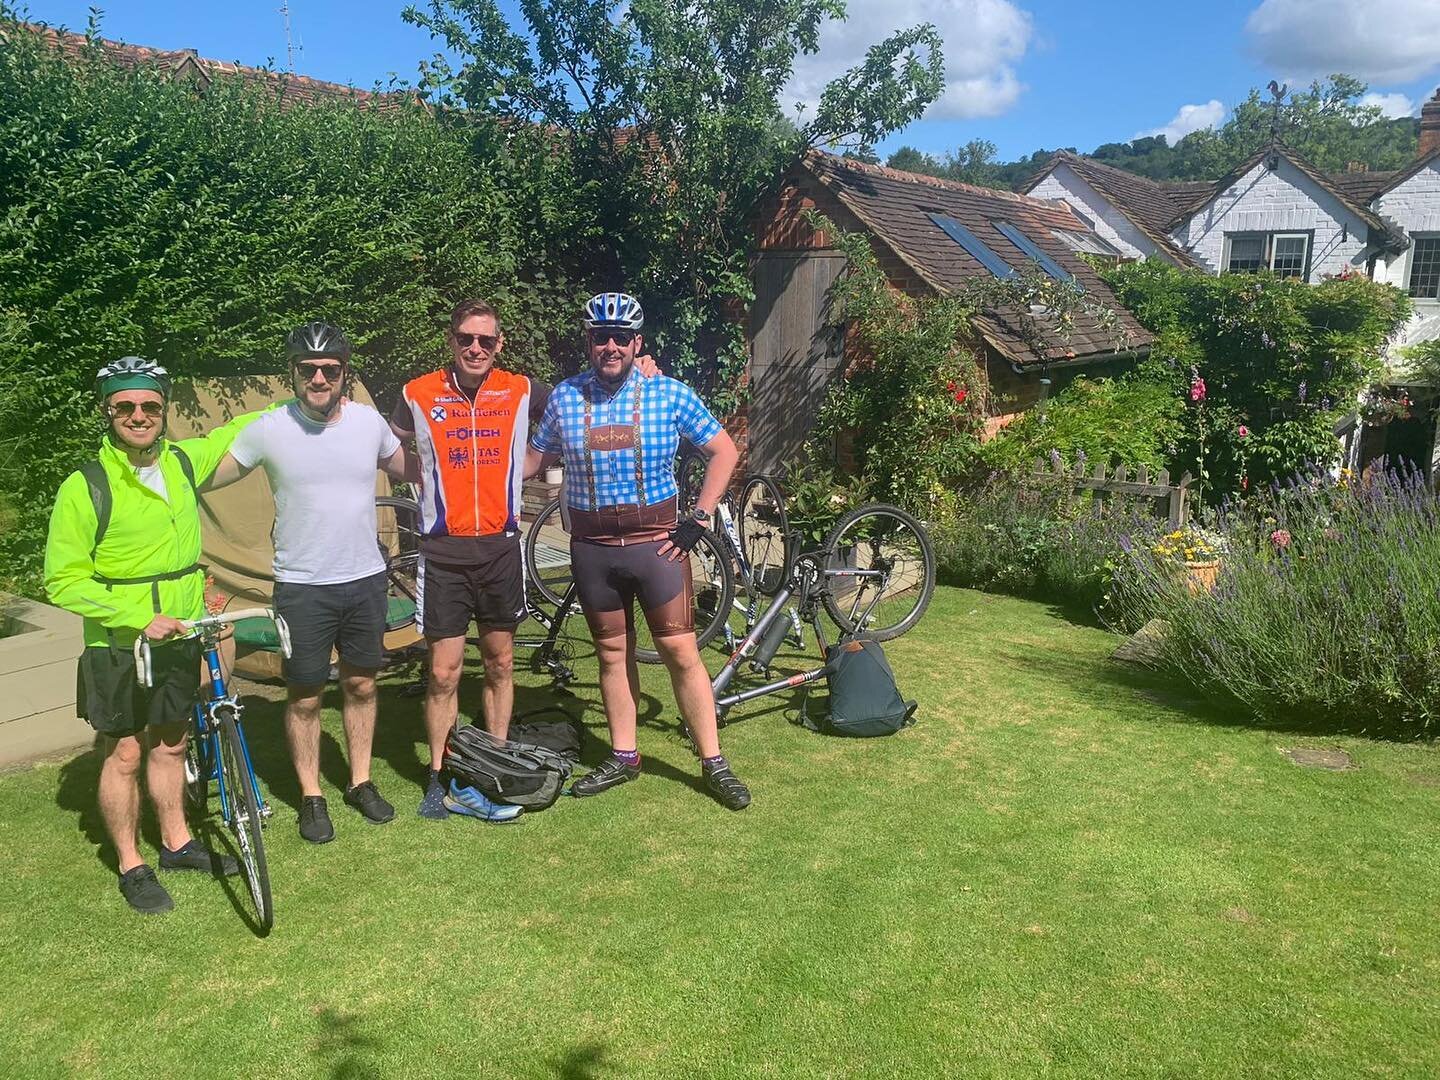 Cycling guests last weekend enjoying Vaughans accommodation and garden facilities on a beautiful summer morning !